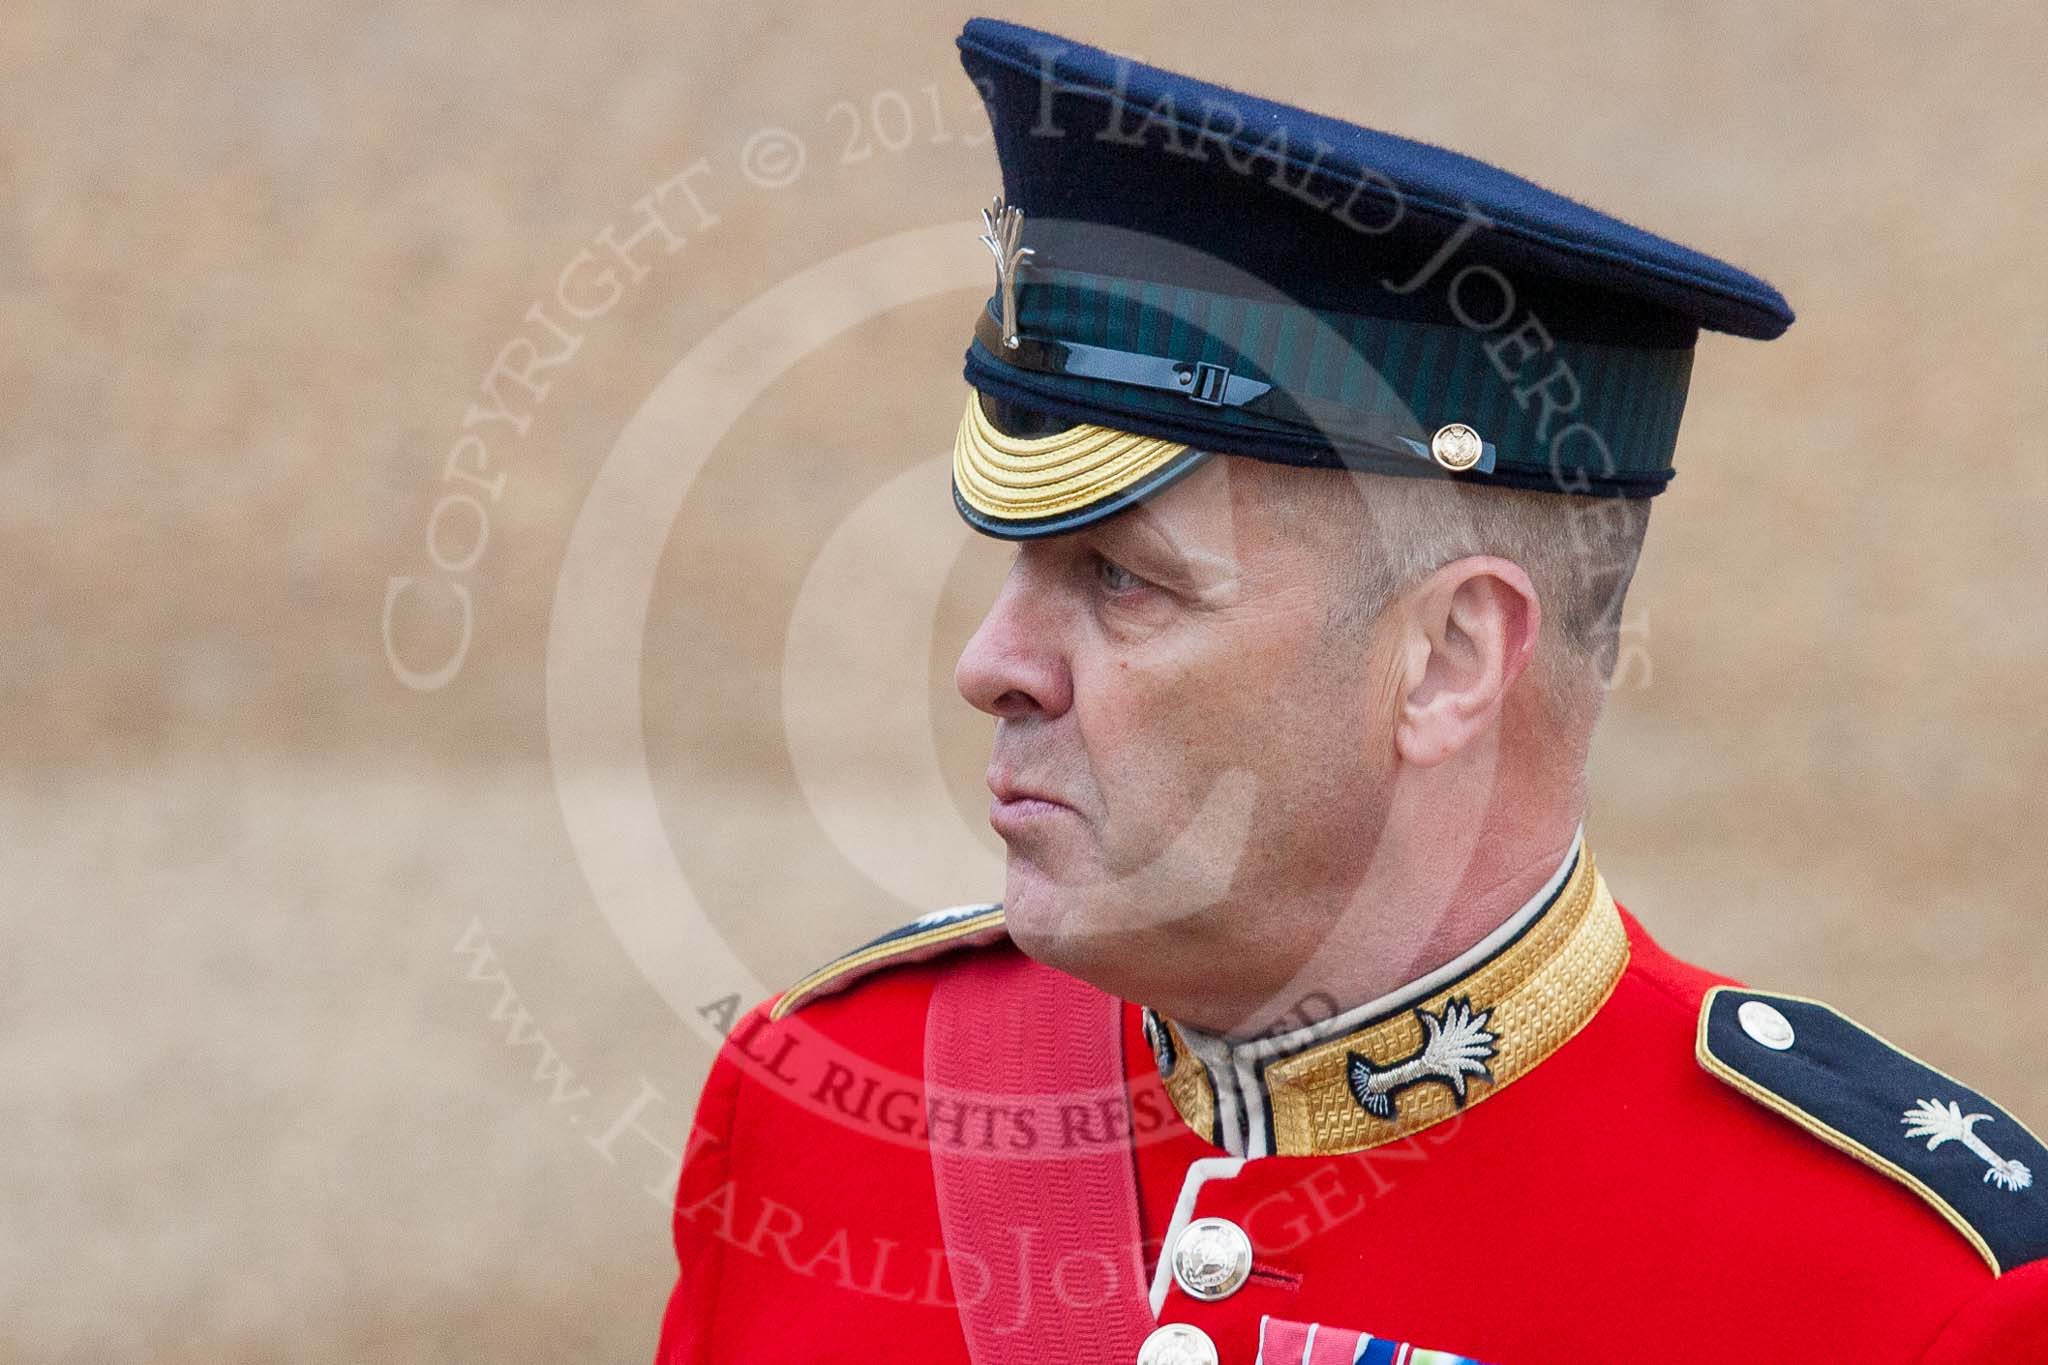 Trooping the Colour 2015: WO1 Garrison Sergeant Major W D G Mott OBE MVO, Welsh Guards, the man in charge of ceremonial events for London District, on his last day at work before retiring from the army. Image #30, 13 June 2015 10:00 Horse Guards Parade, London, UK